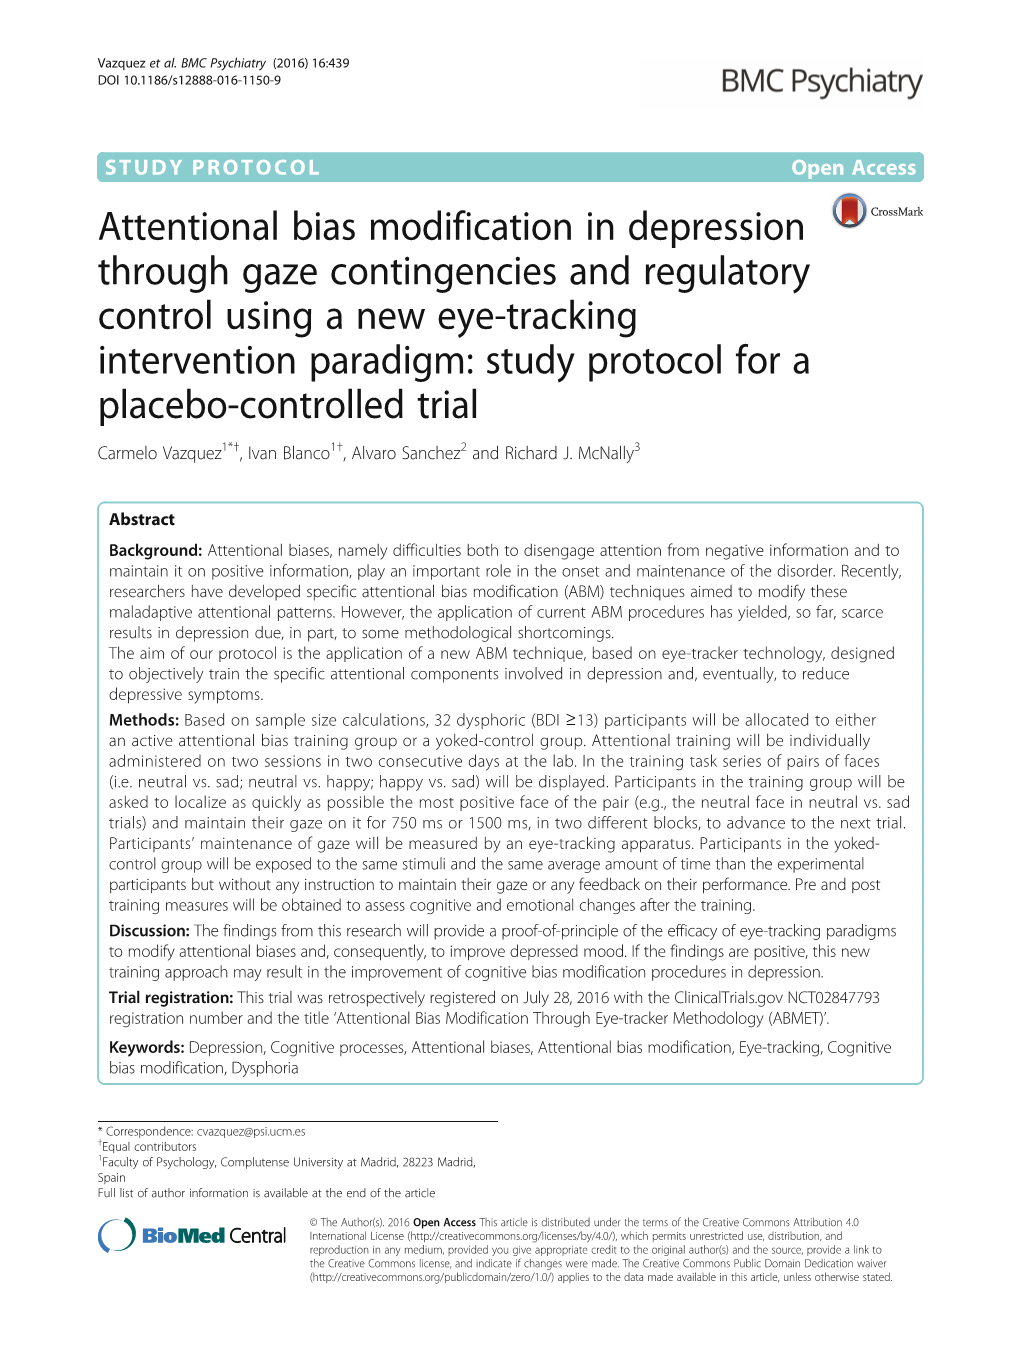 Attentional Bias Modification in Depression